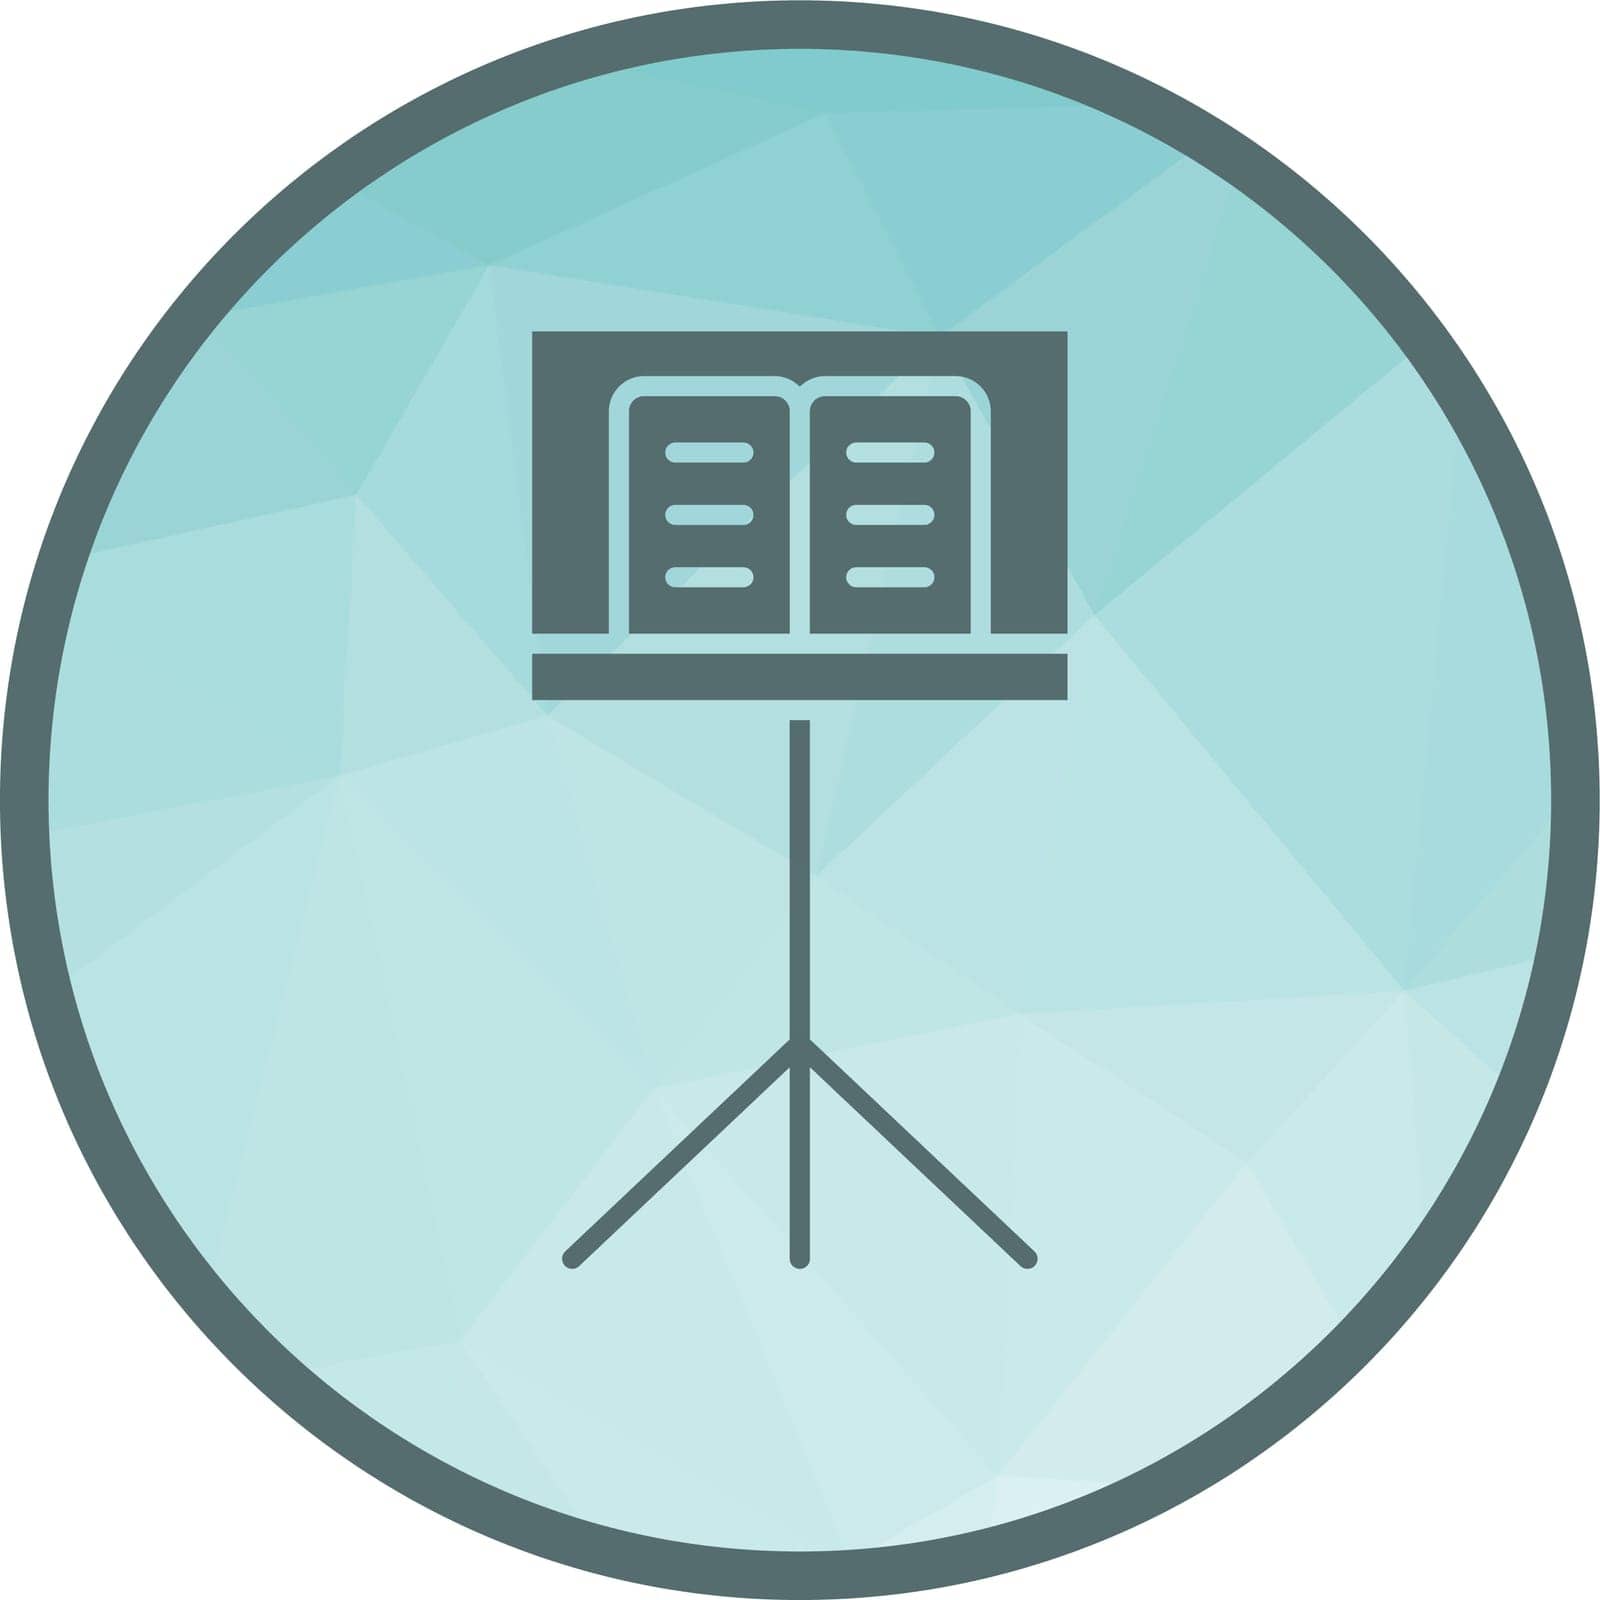 Music Stand icon vector image. Suitable for mobile application web application and print media.